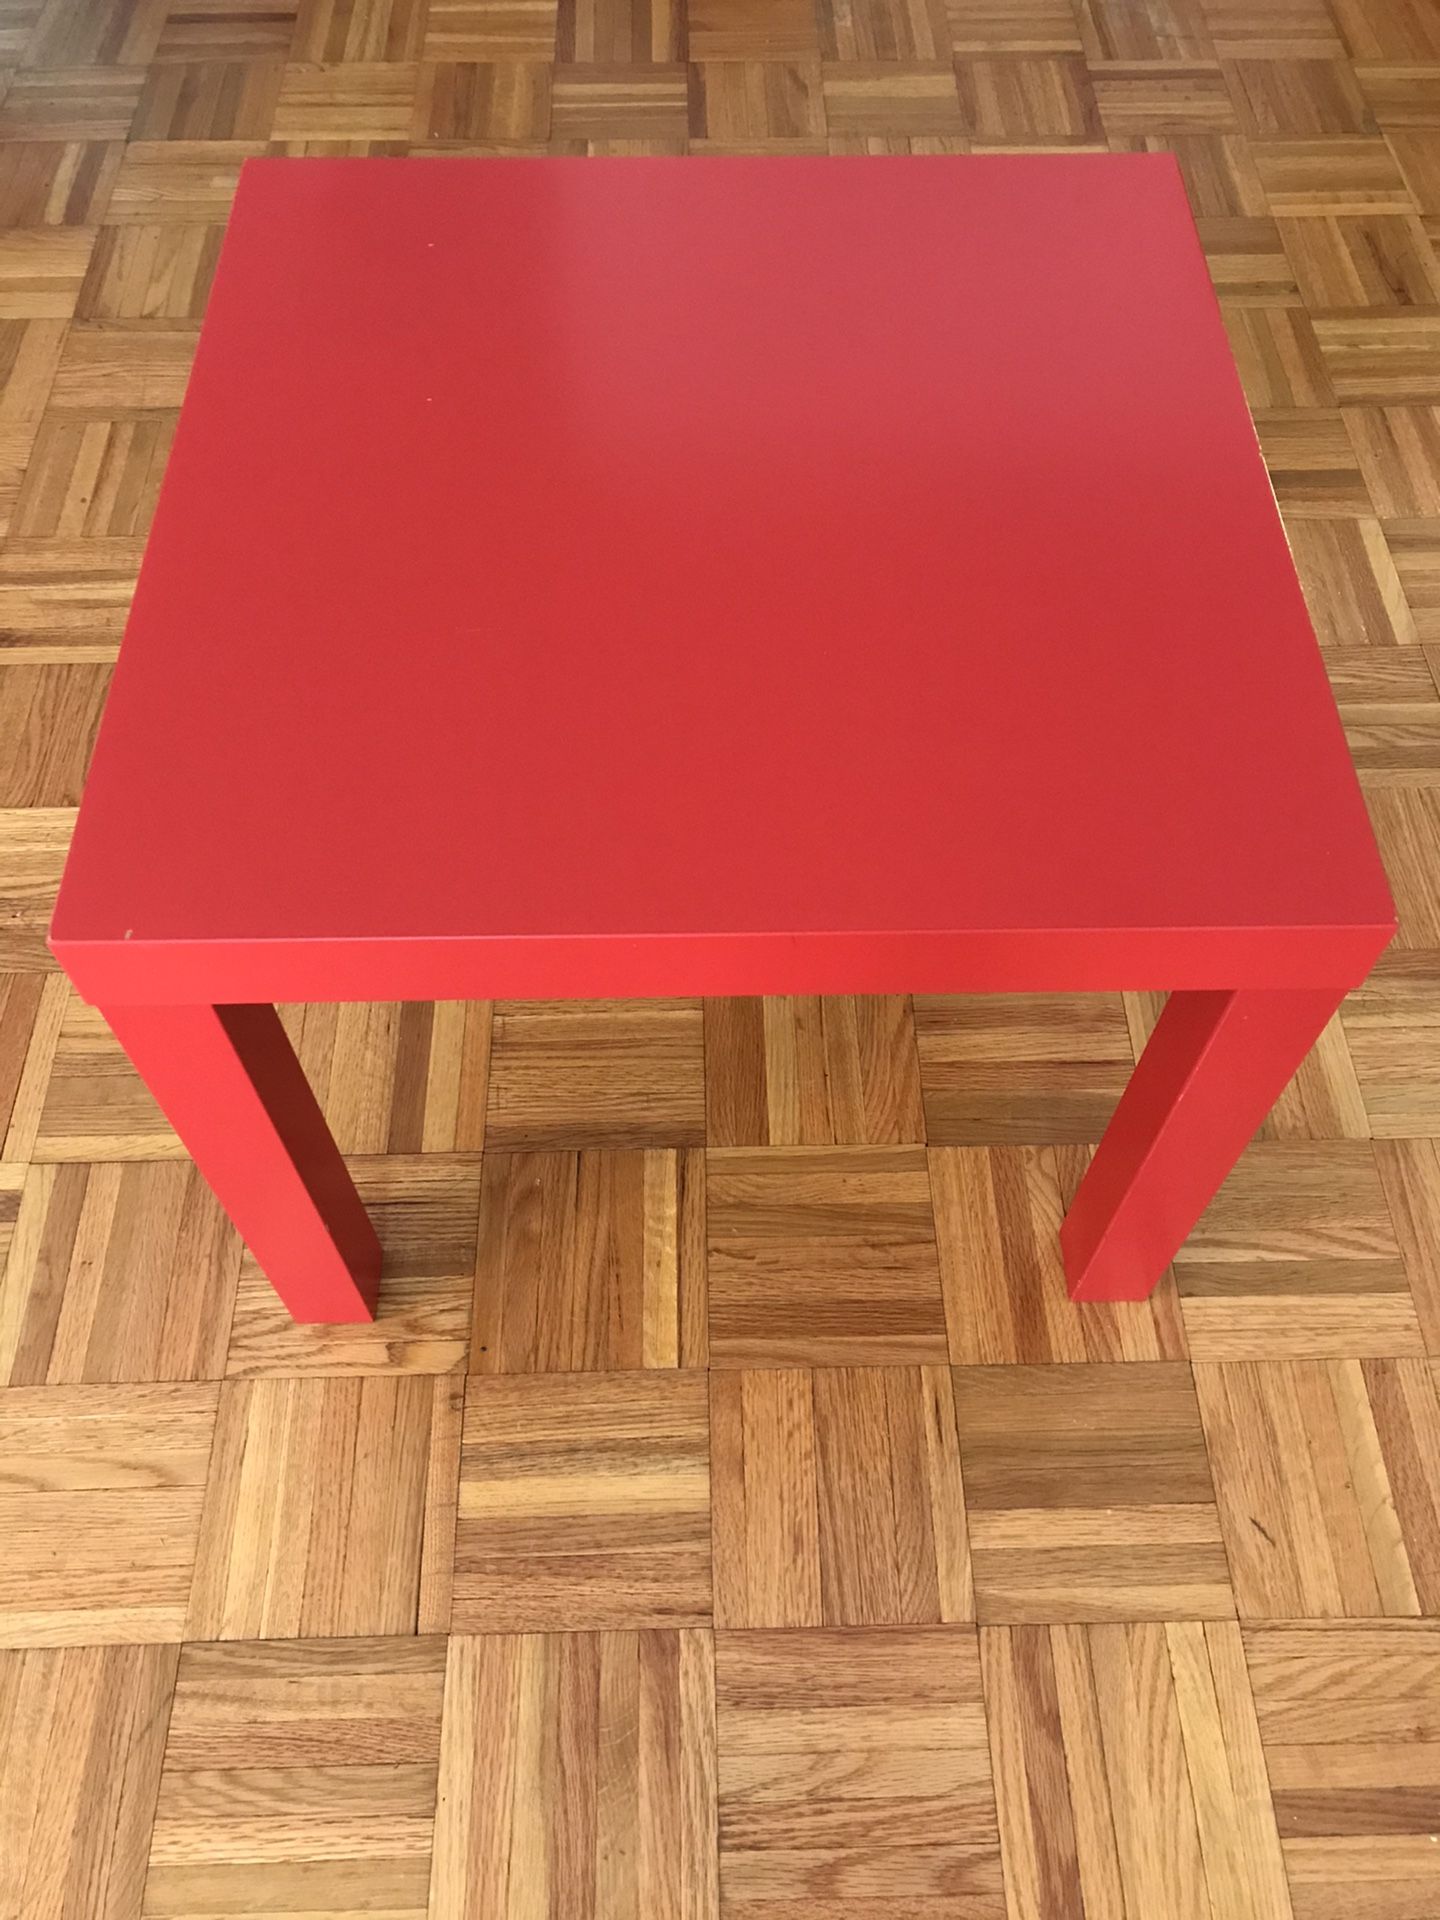 Red side table - used